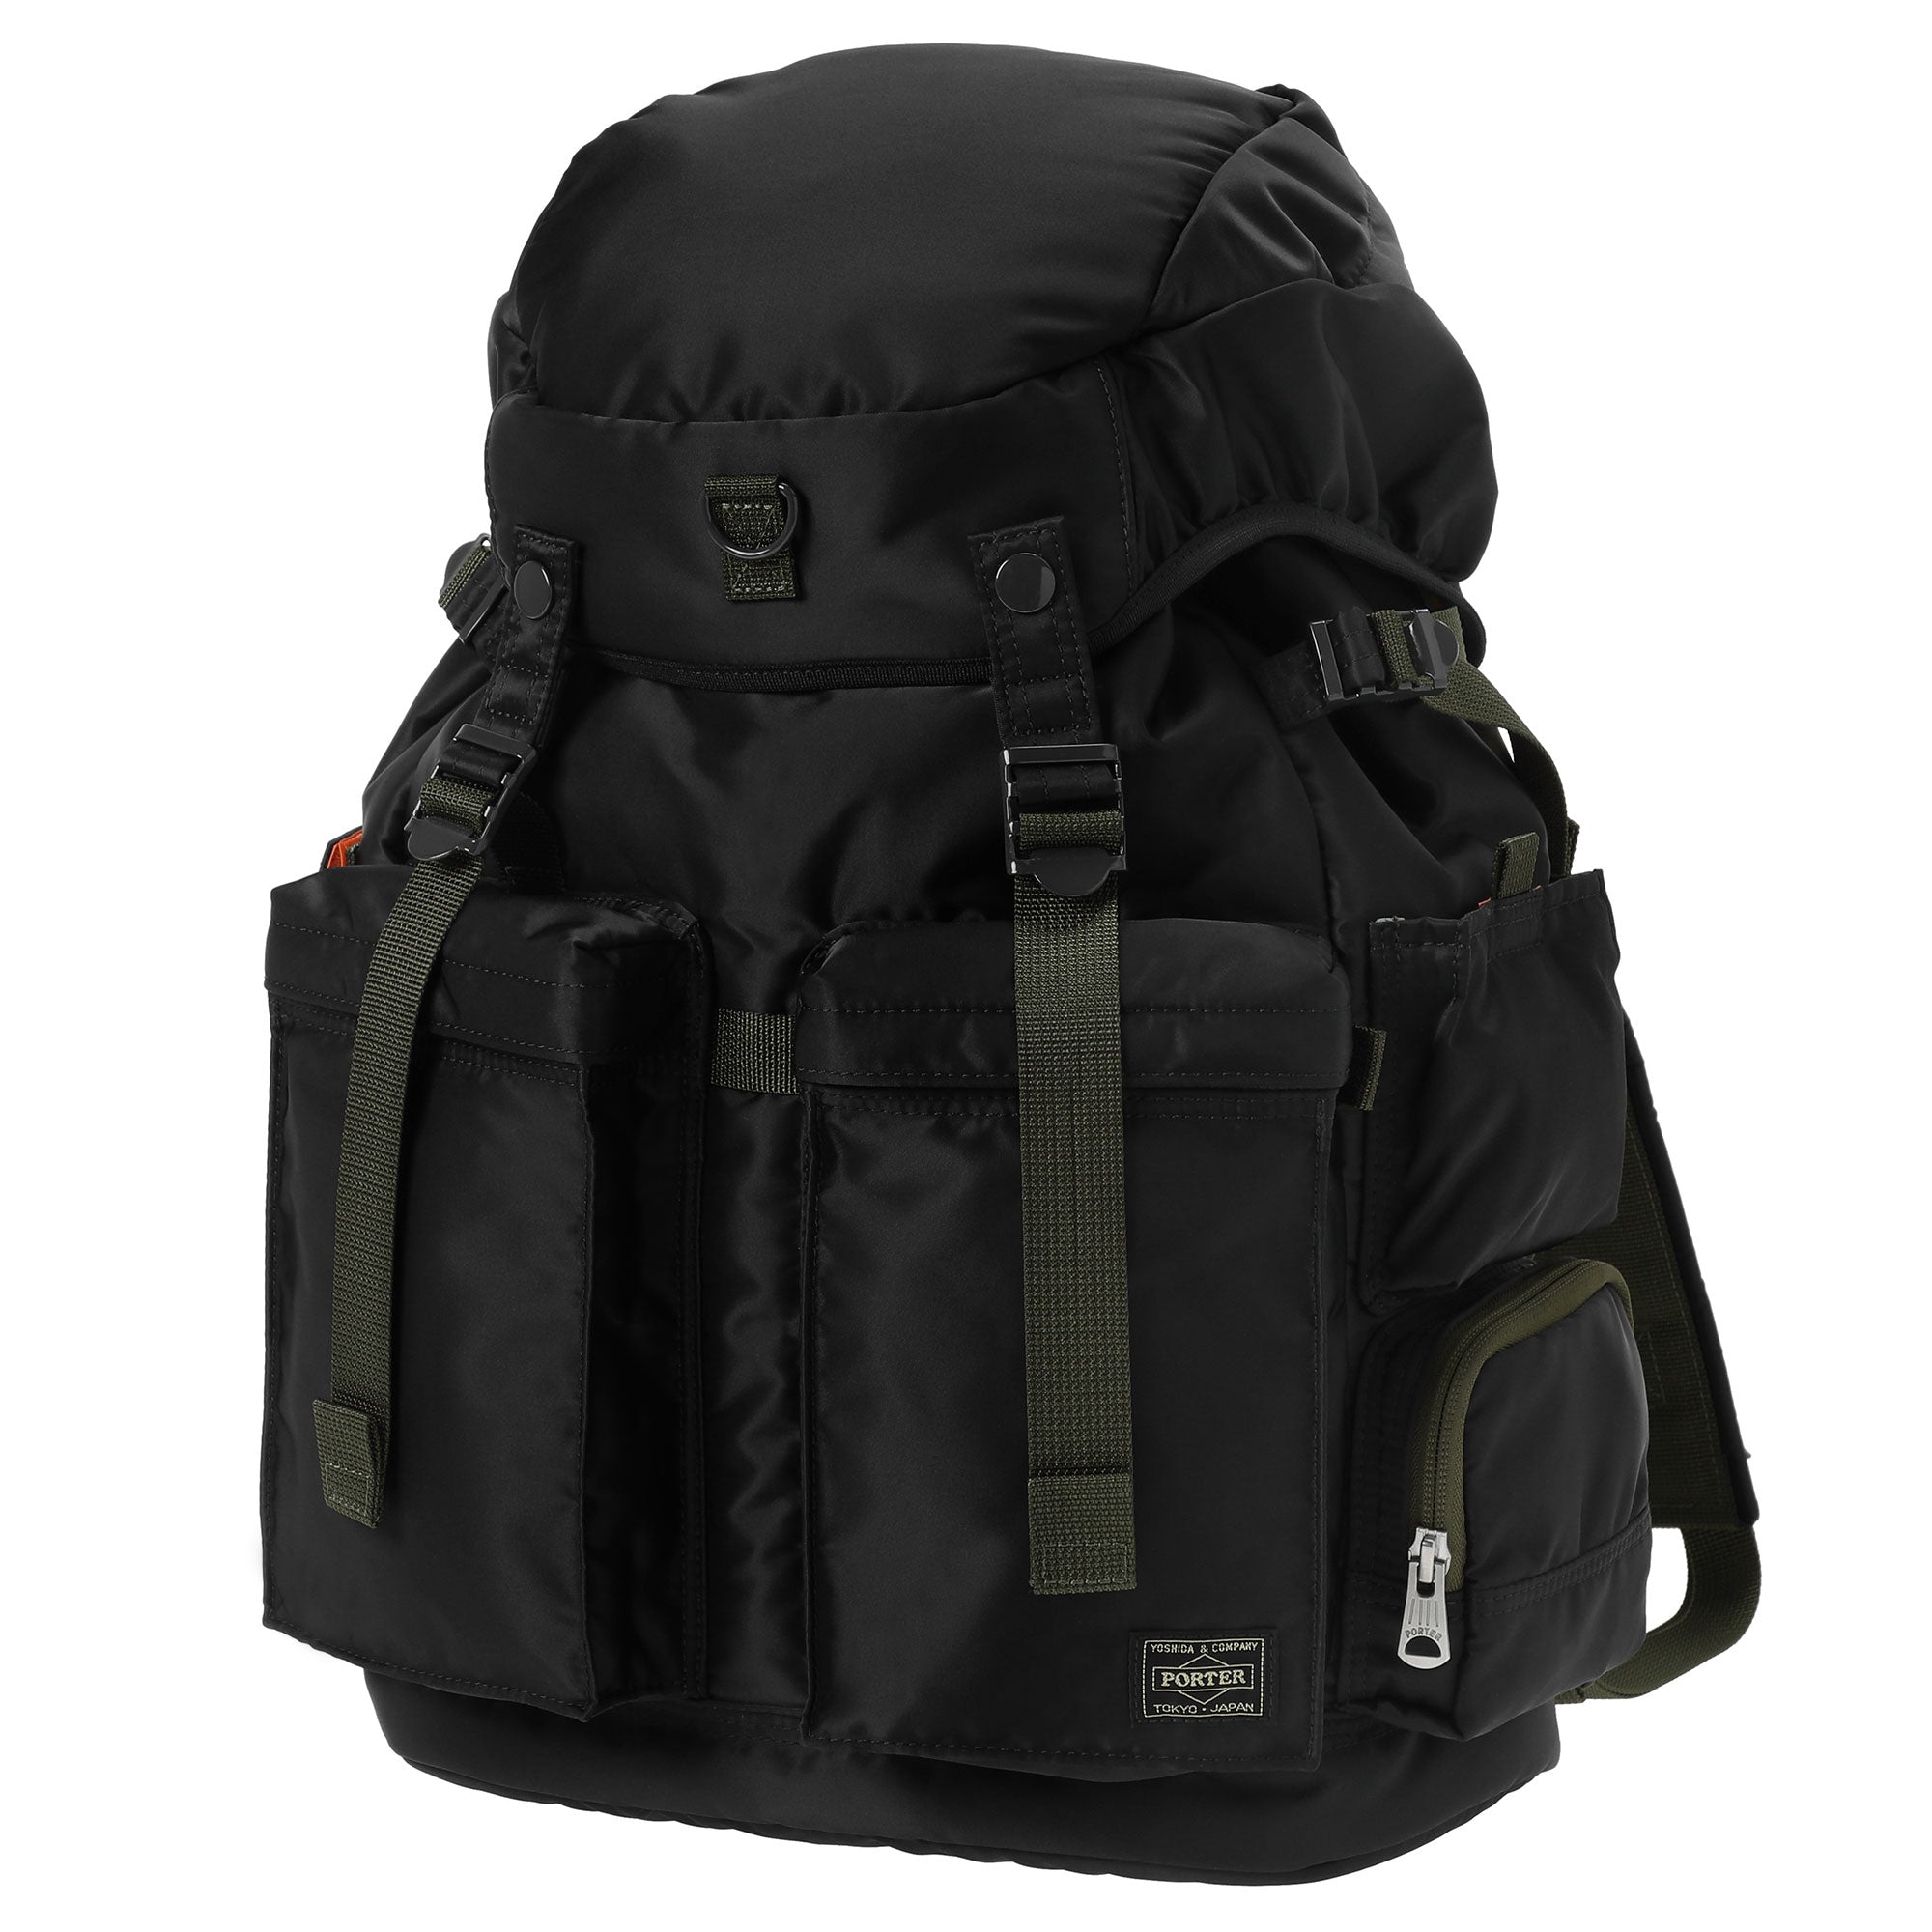 PORTER - PX TANKER Tactical Pack - (Black) view 1